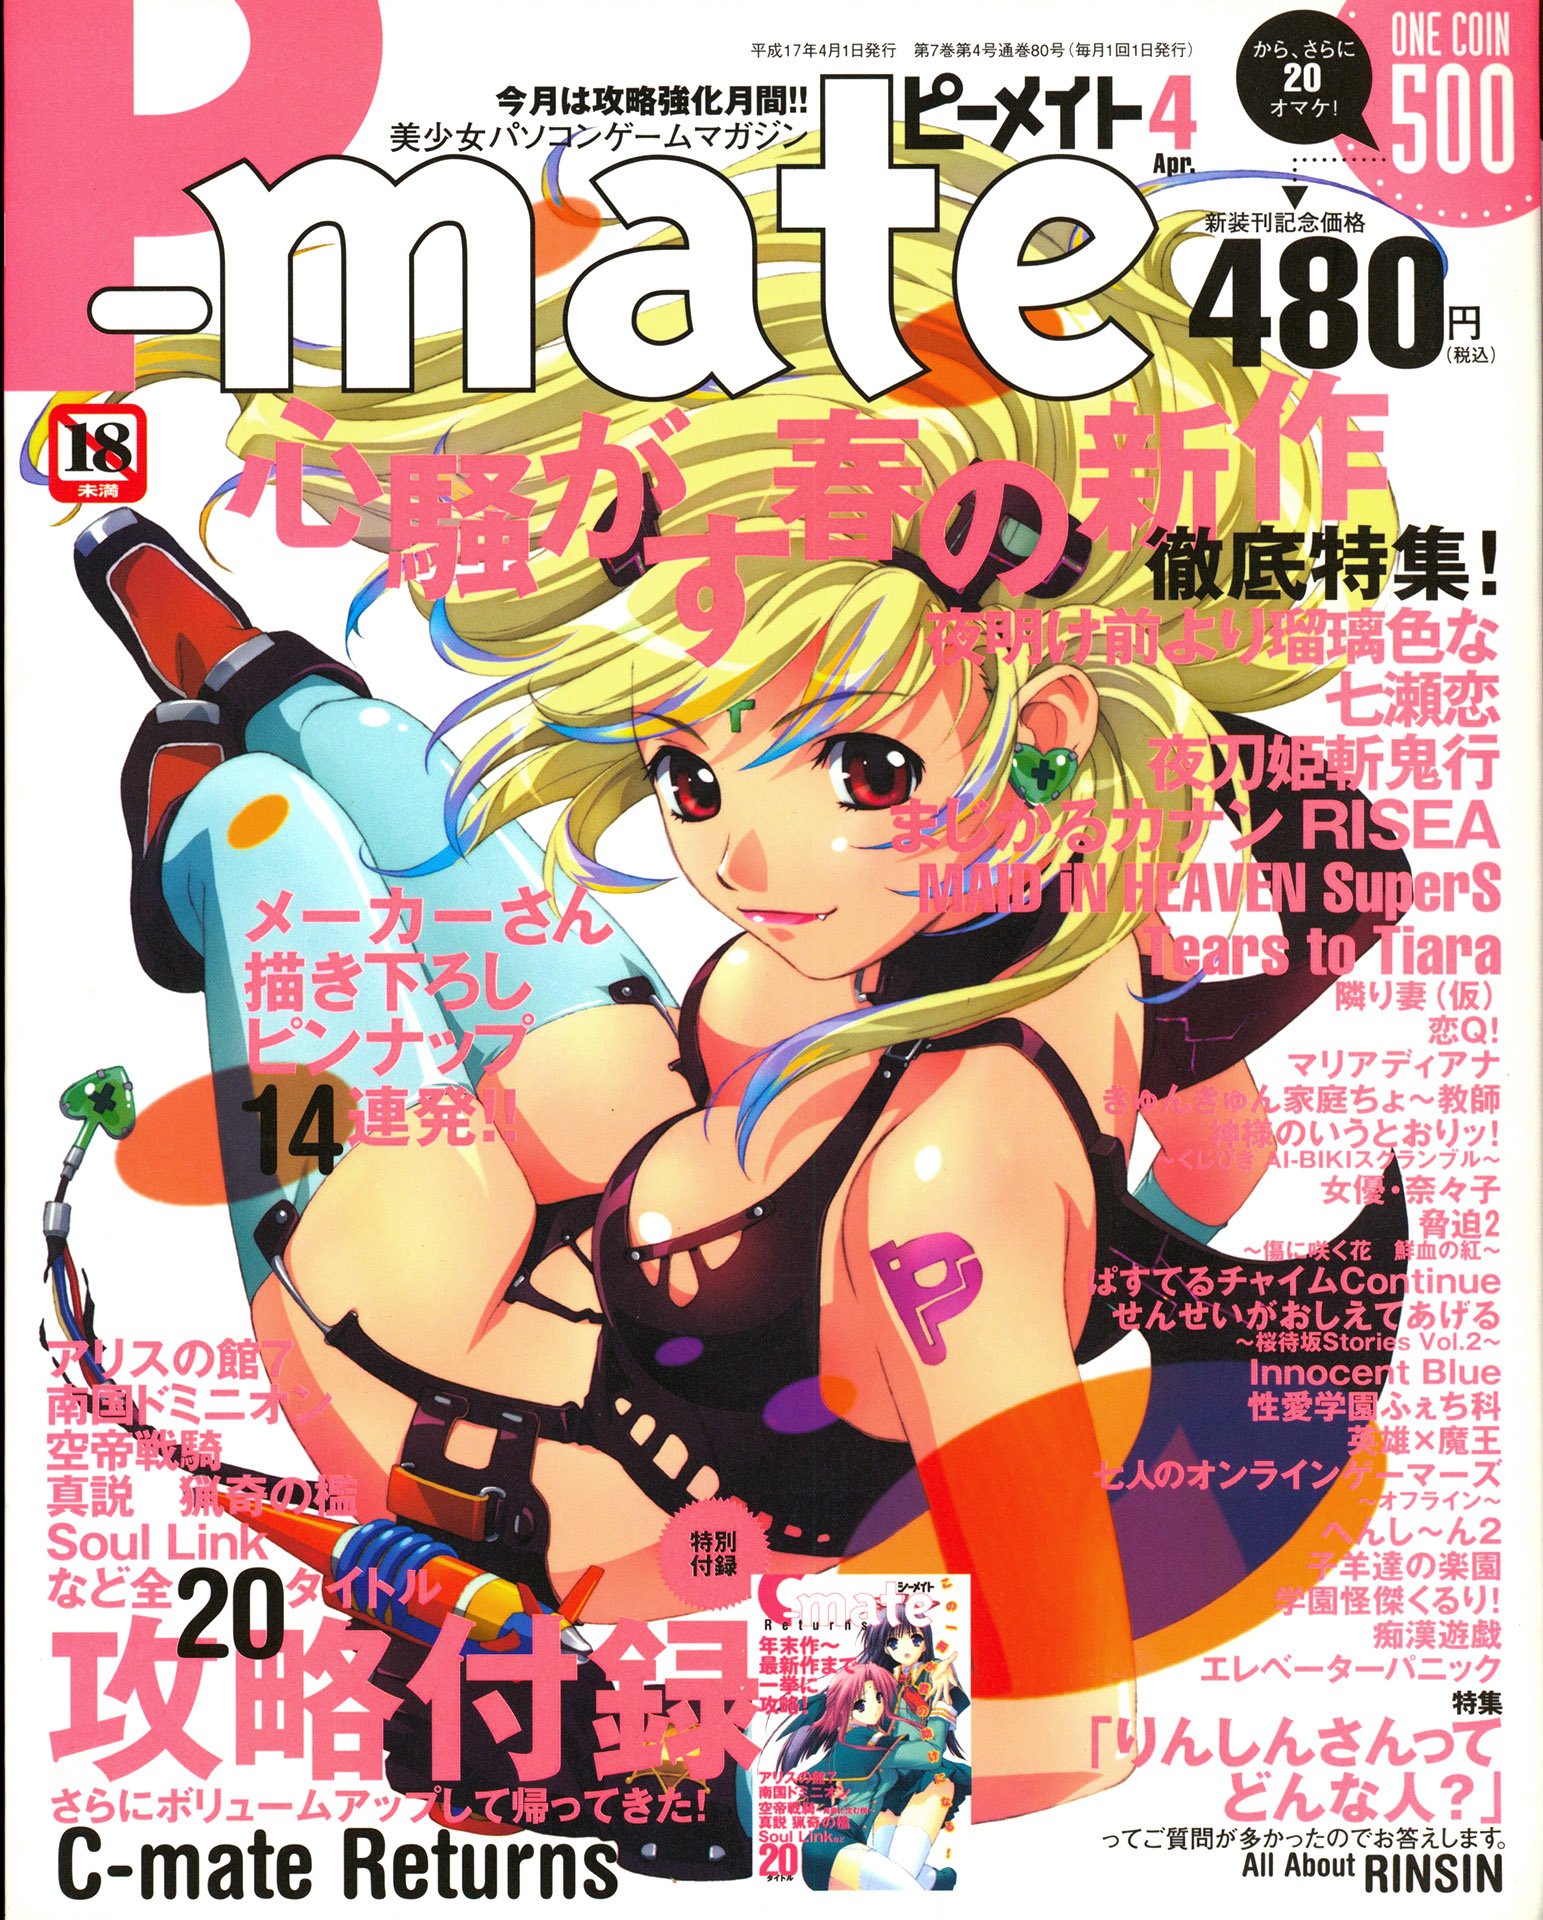 P-Mate Issue 61 (April 2005)